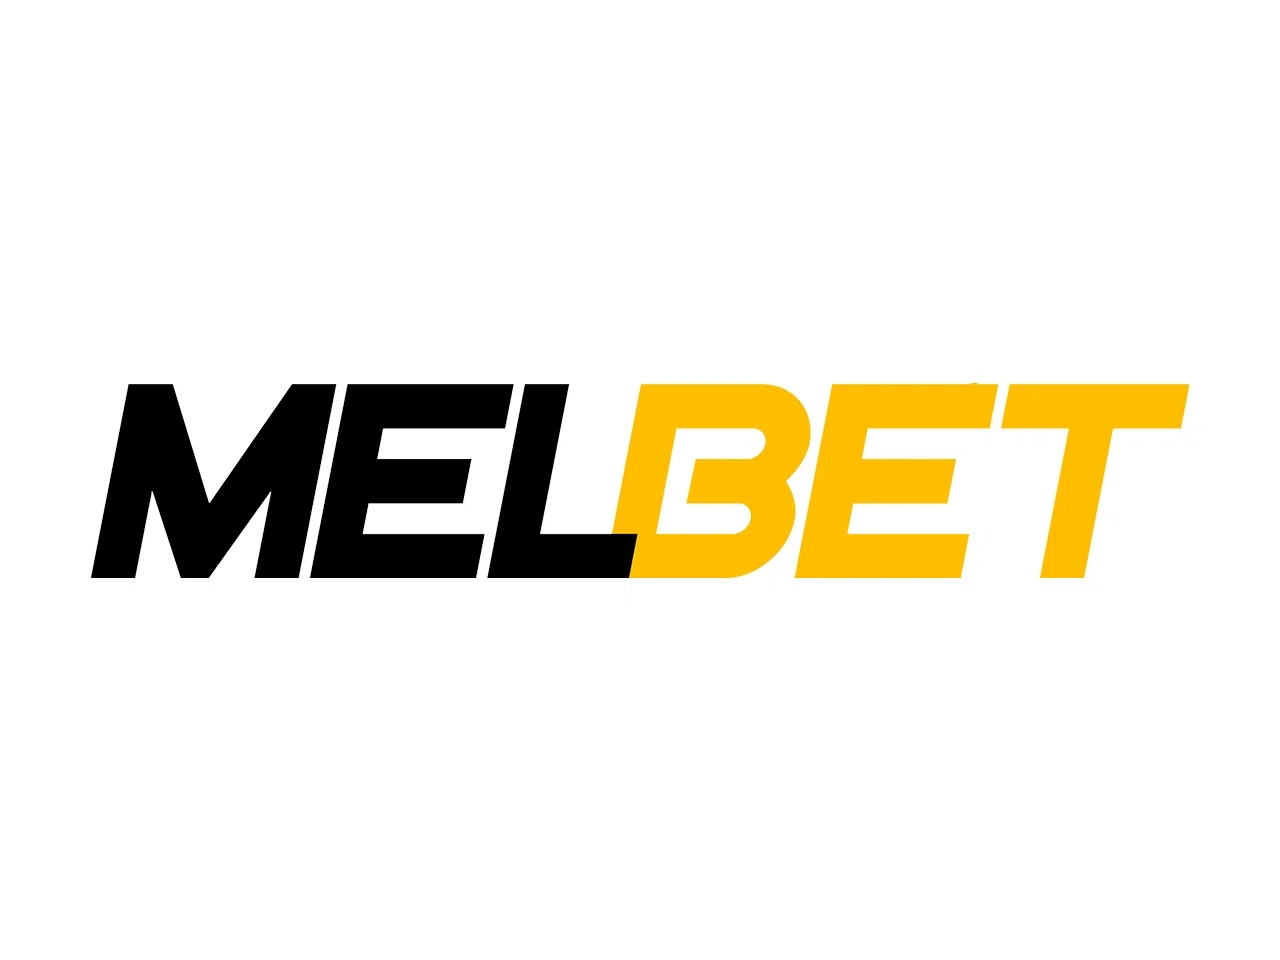 How to bet on Melbet for quick winnings